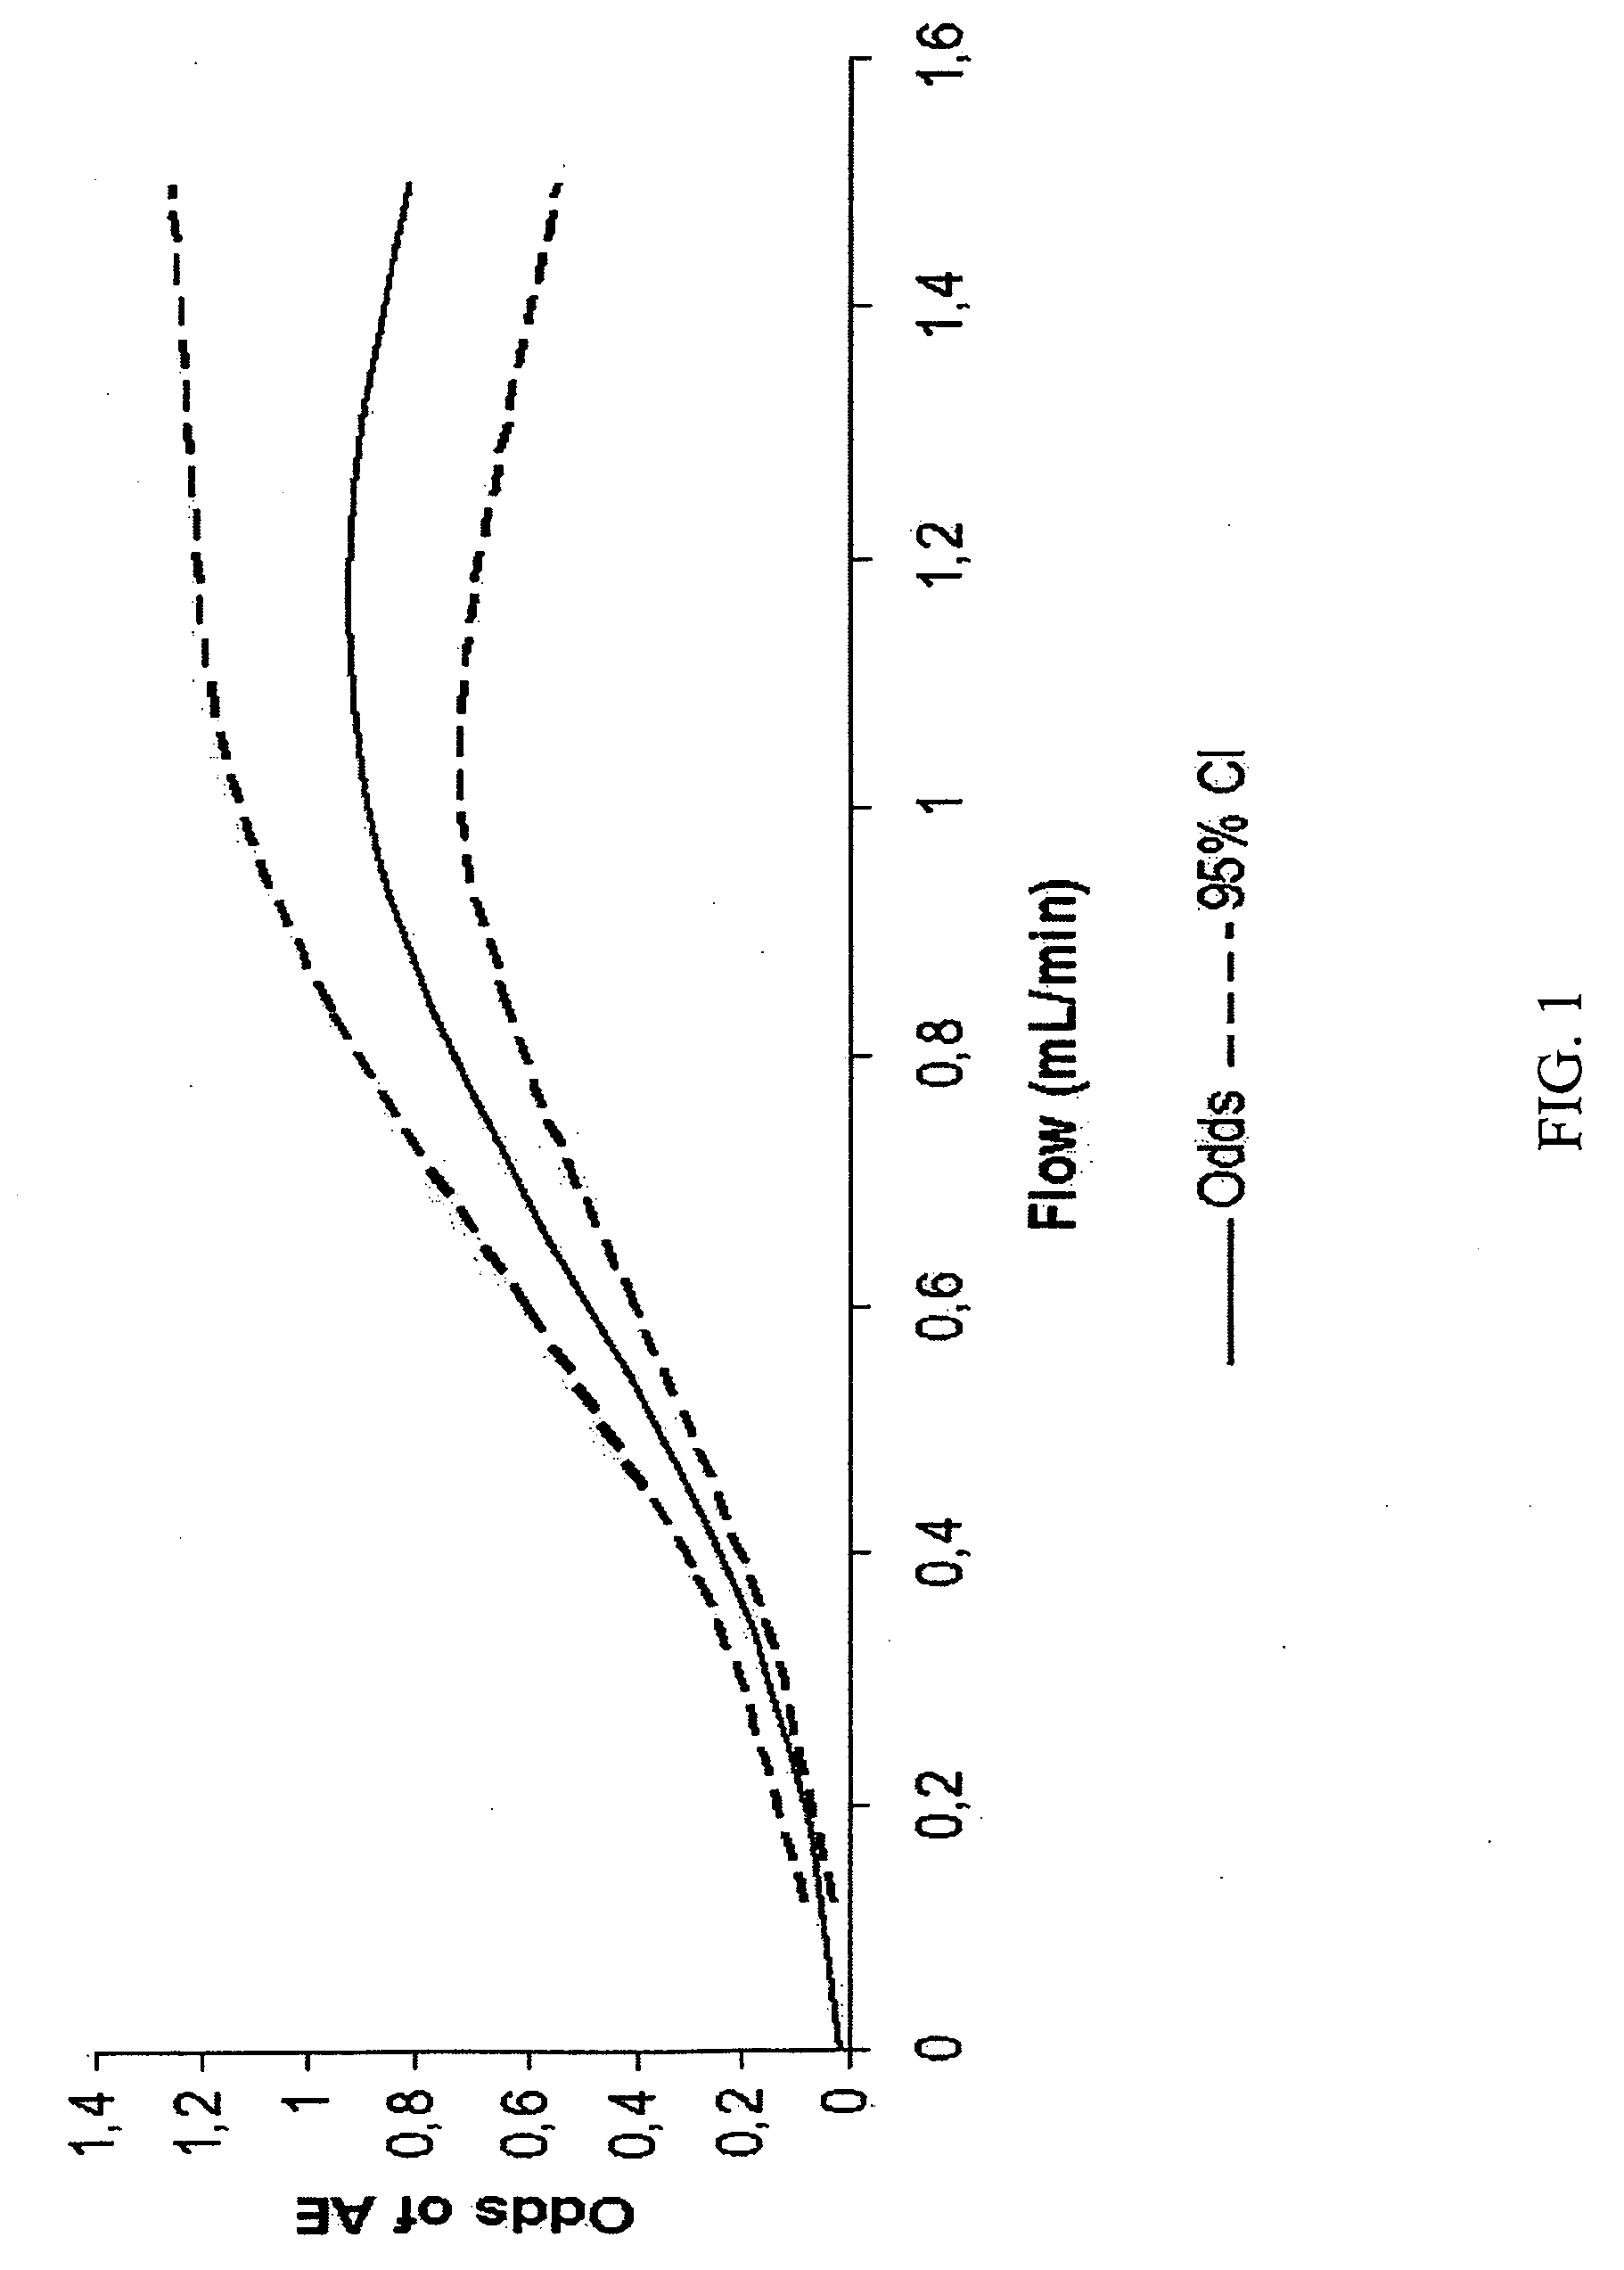 Method of applying an injectable filler